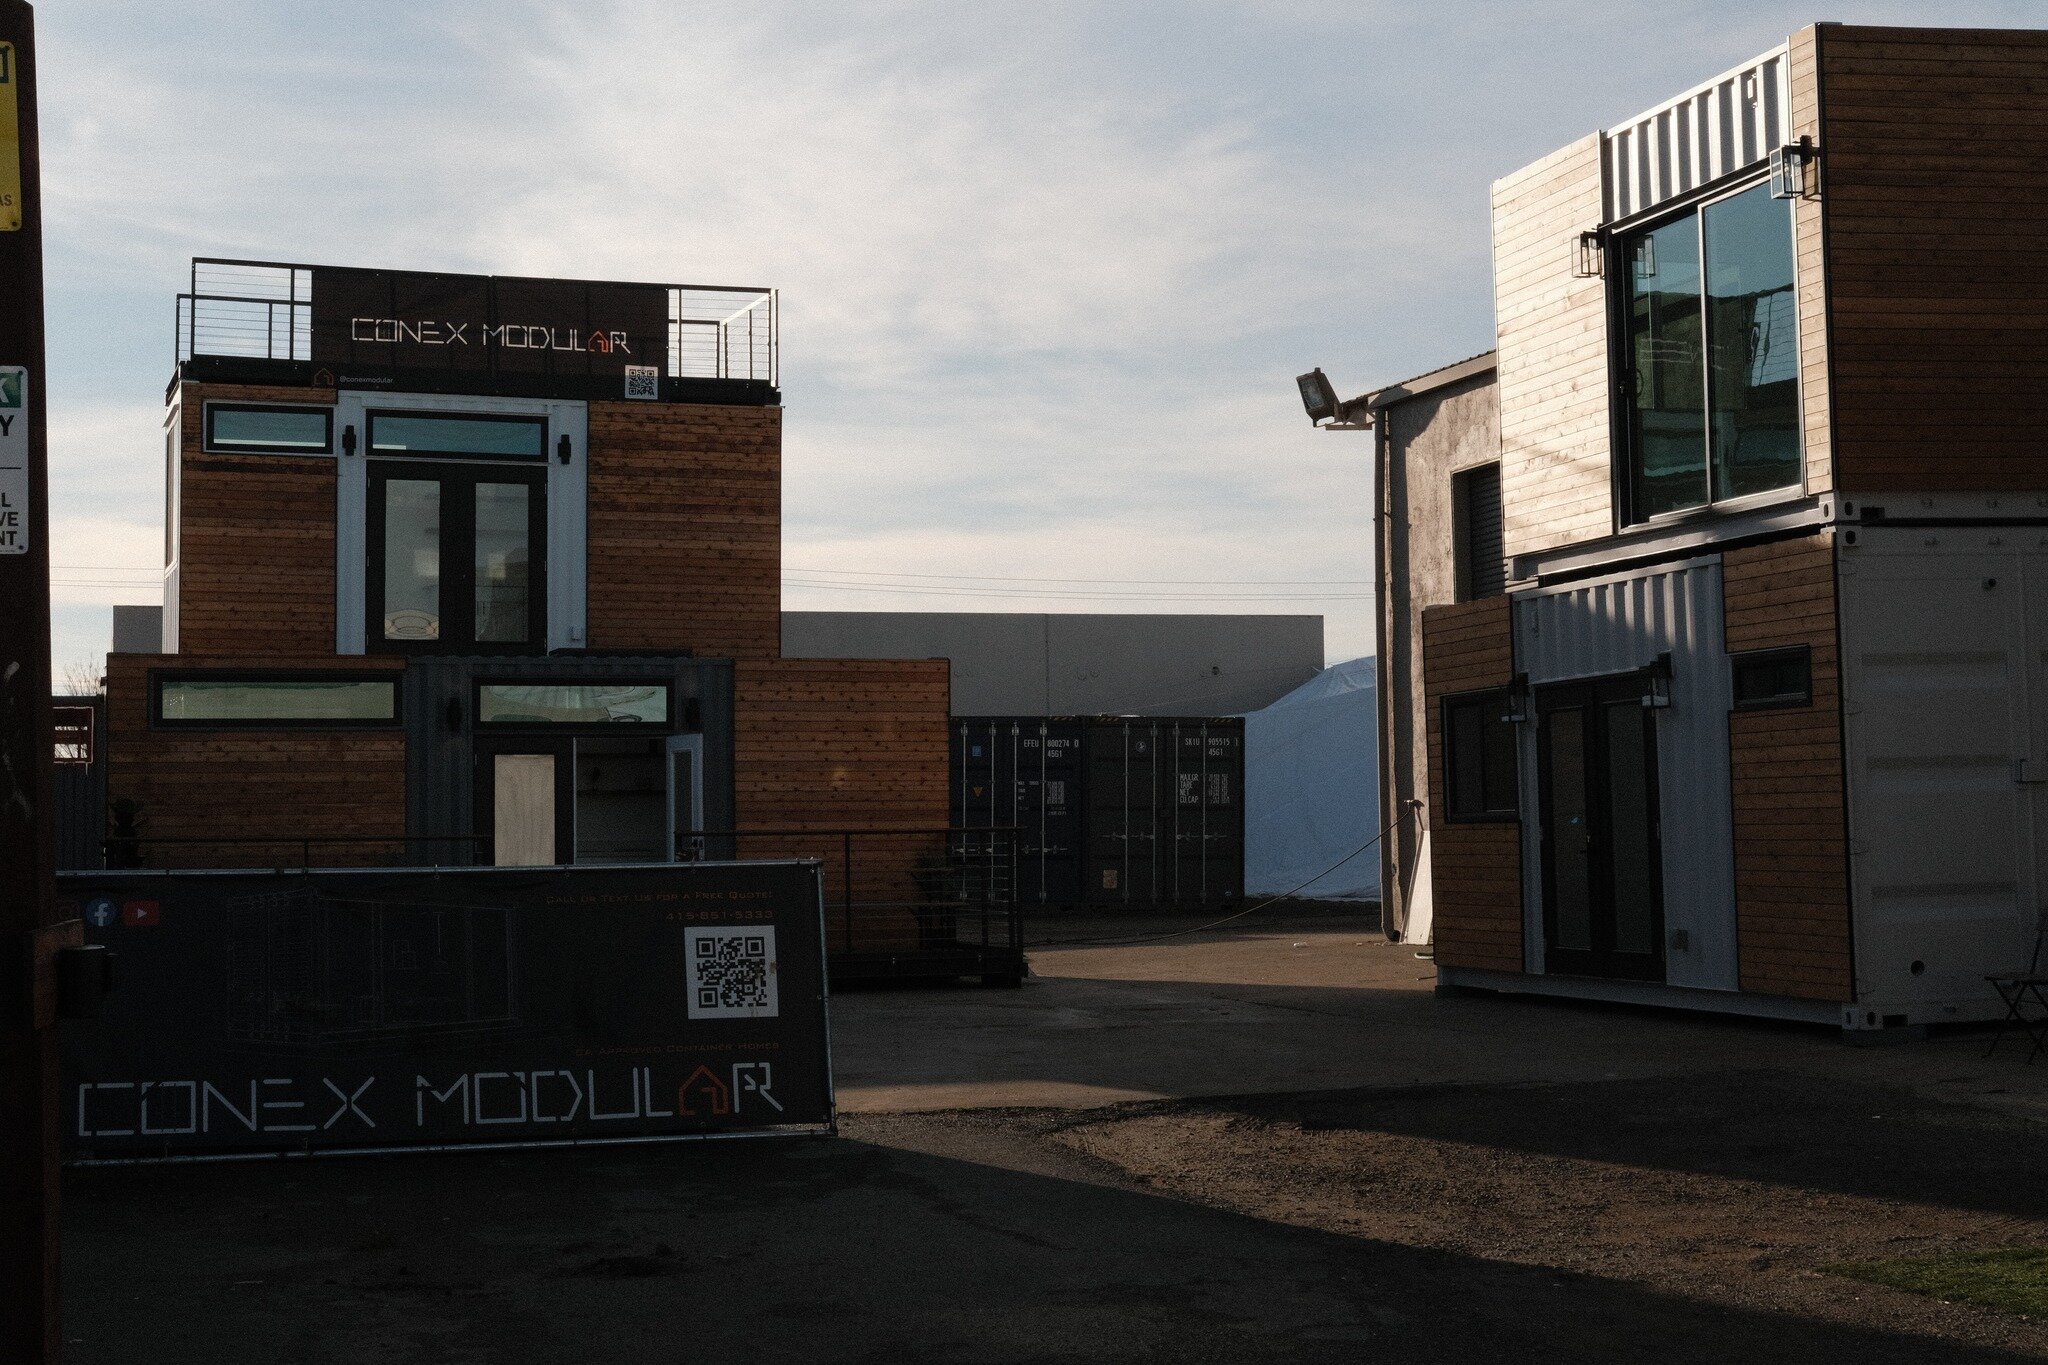 Happy #modularmonday from us here at Conex Modular! We have been secretly remodeling our facility, and heres a sneak peak at how things are looking. Don't tell anyone I posted this! 🤫🤫🤫

#conexmodular
#modularbuilding
#ADU
#conex
#bayarea
#modifie